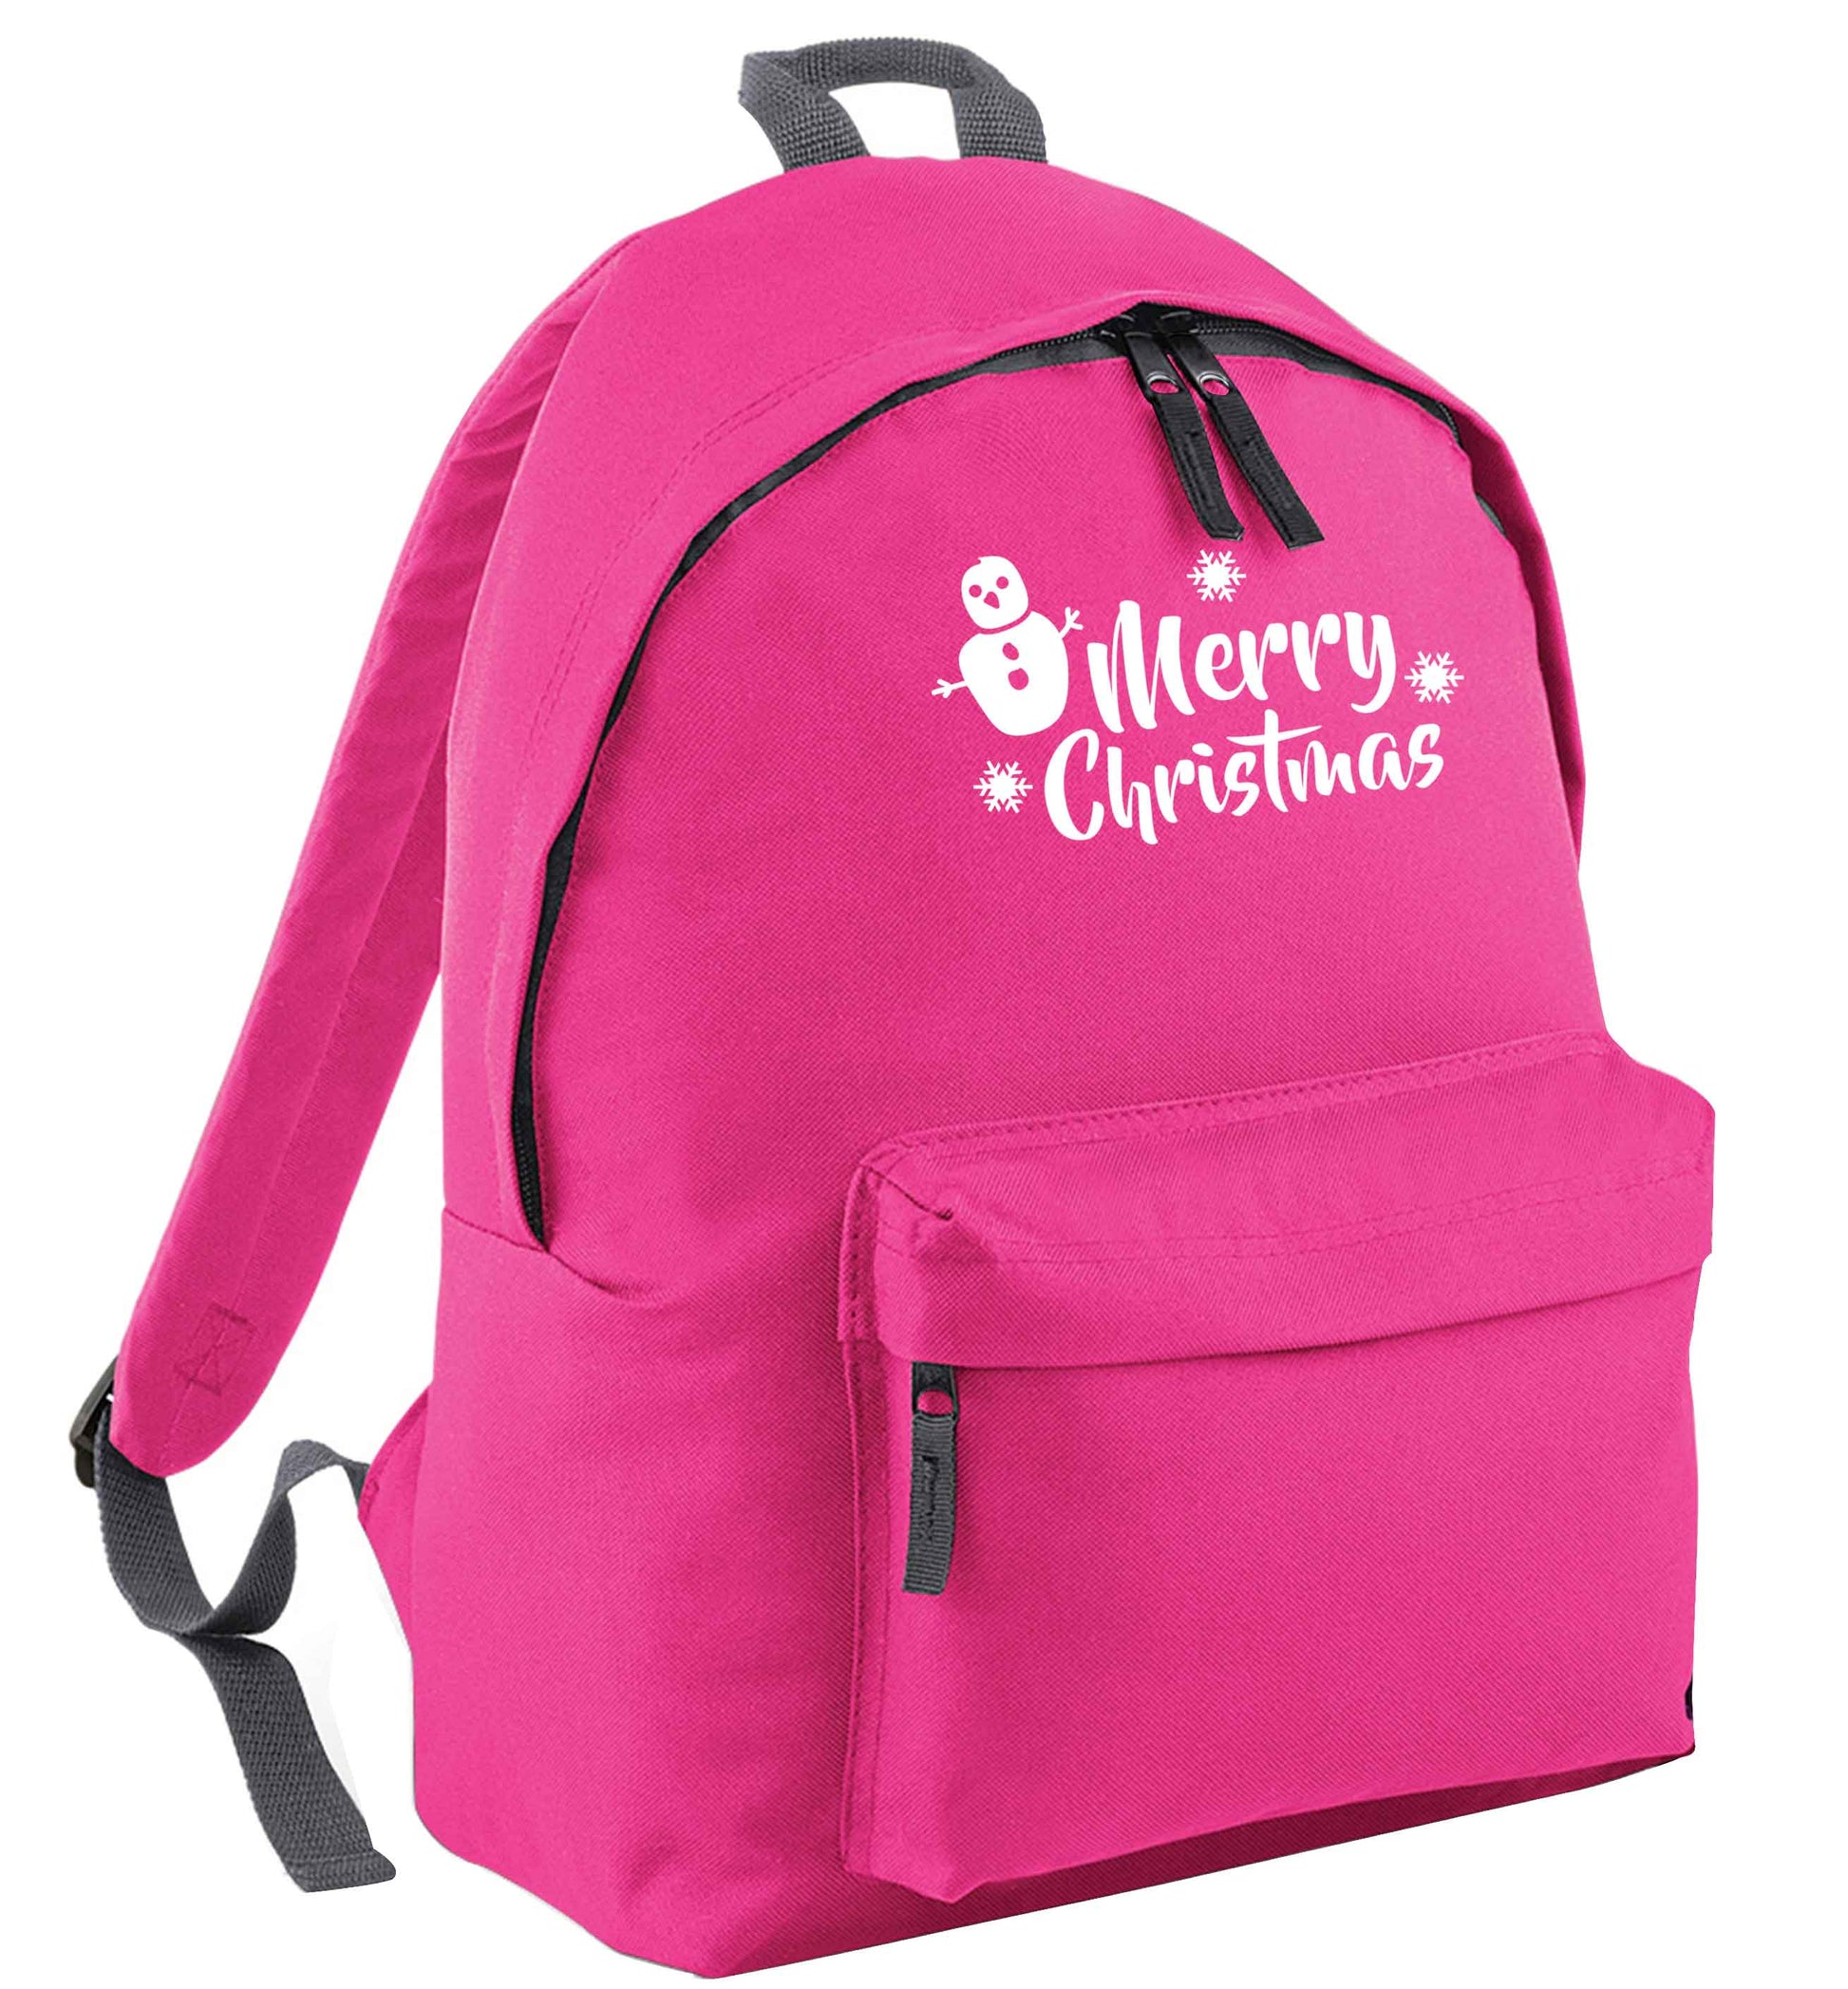 Merry Christmas - snowman pink adults backpack